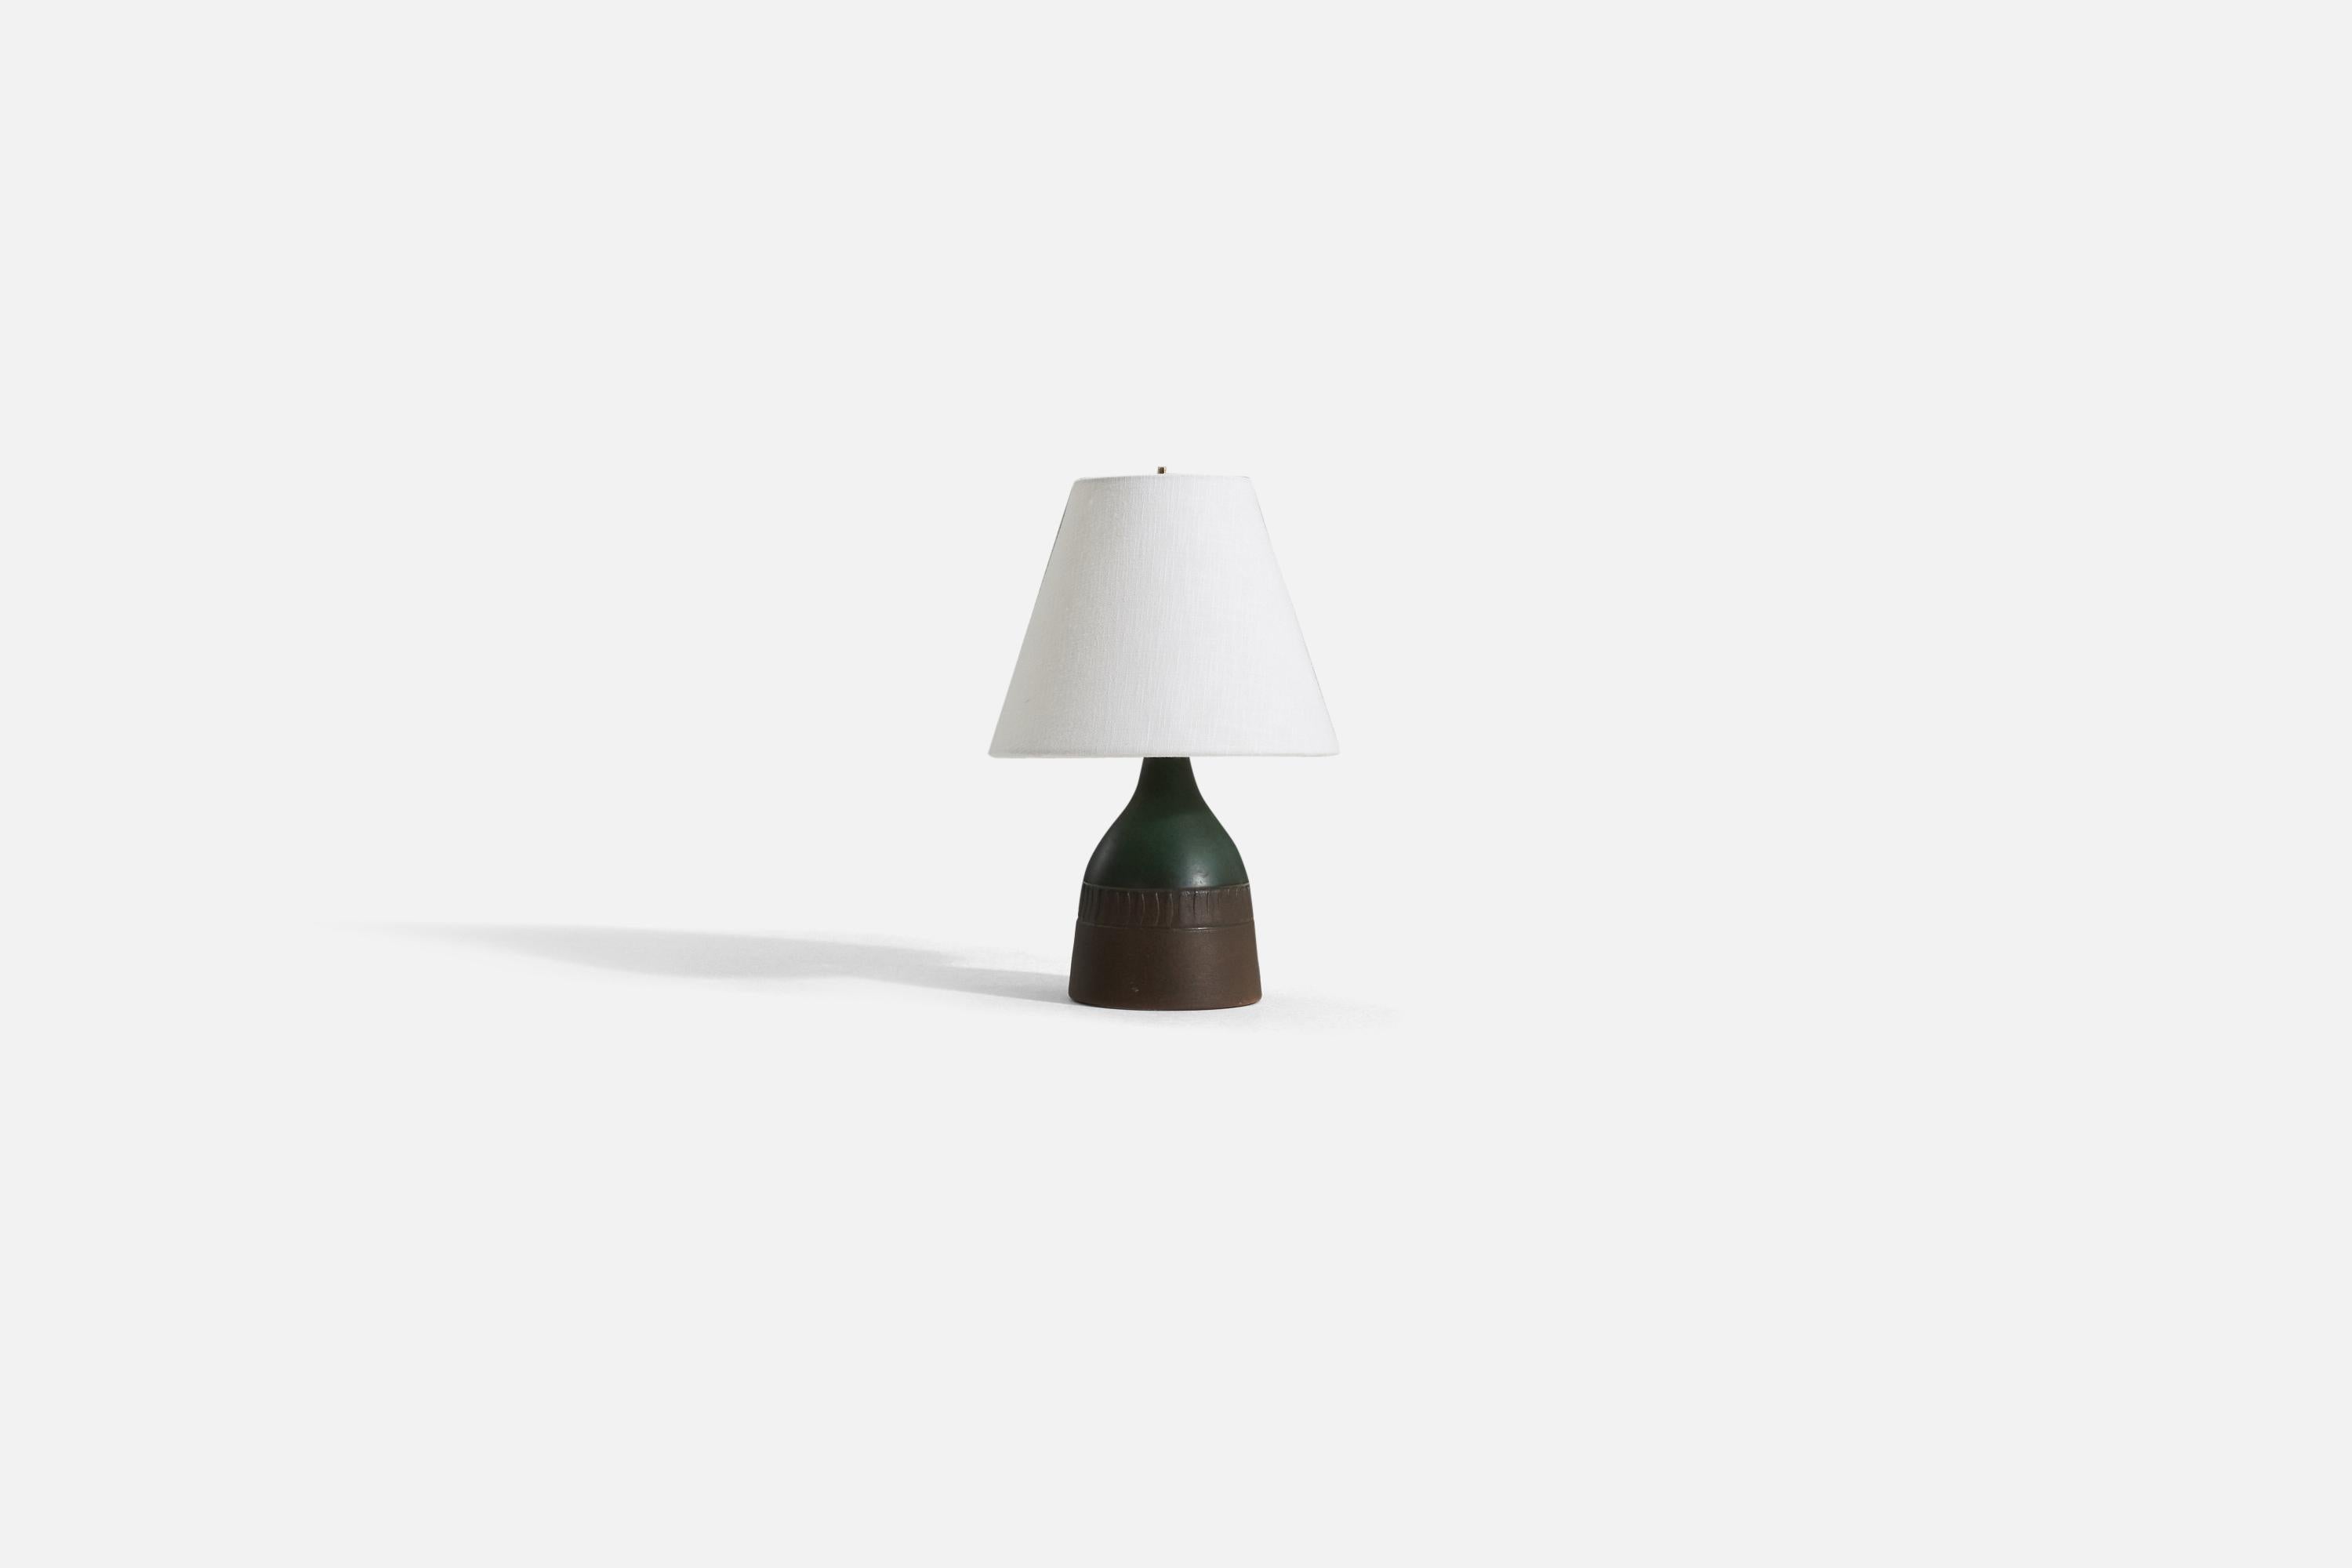 A glazed stoneware table lamp, produced by Krukmakaren Ystad, Sweden, 1960s.

Sold without lampshade. 

Dimensions of lamp (inches) : 9.5 x 4.5 x 4.5 (H x W x D)
Dimensions shade (inches) : 4 x 8 x 6.75 (T x B x H)
Dimension of lamp with shade